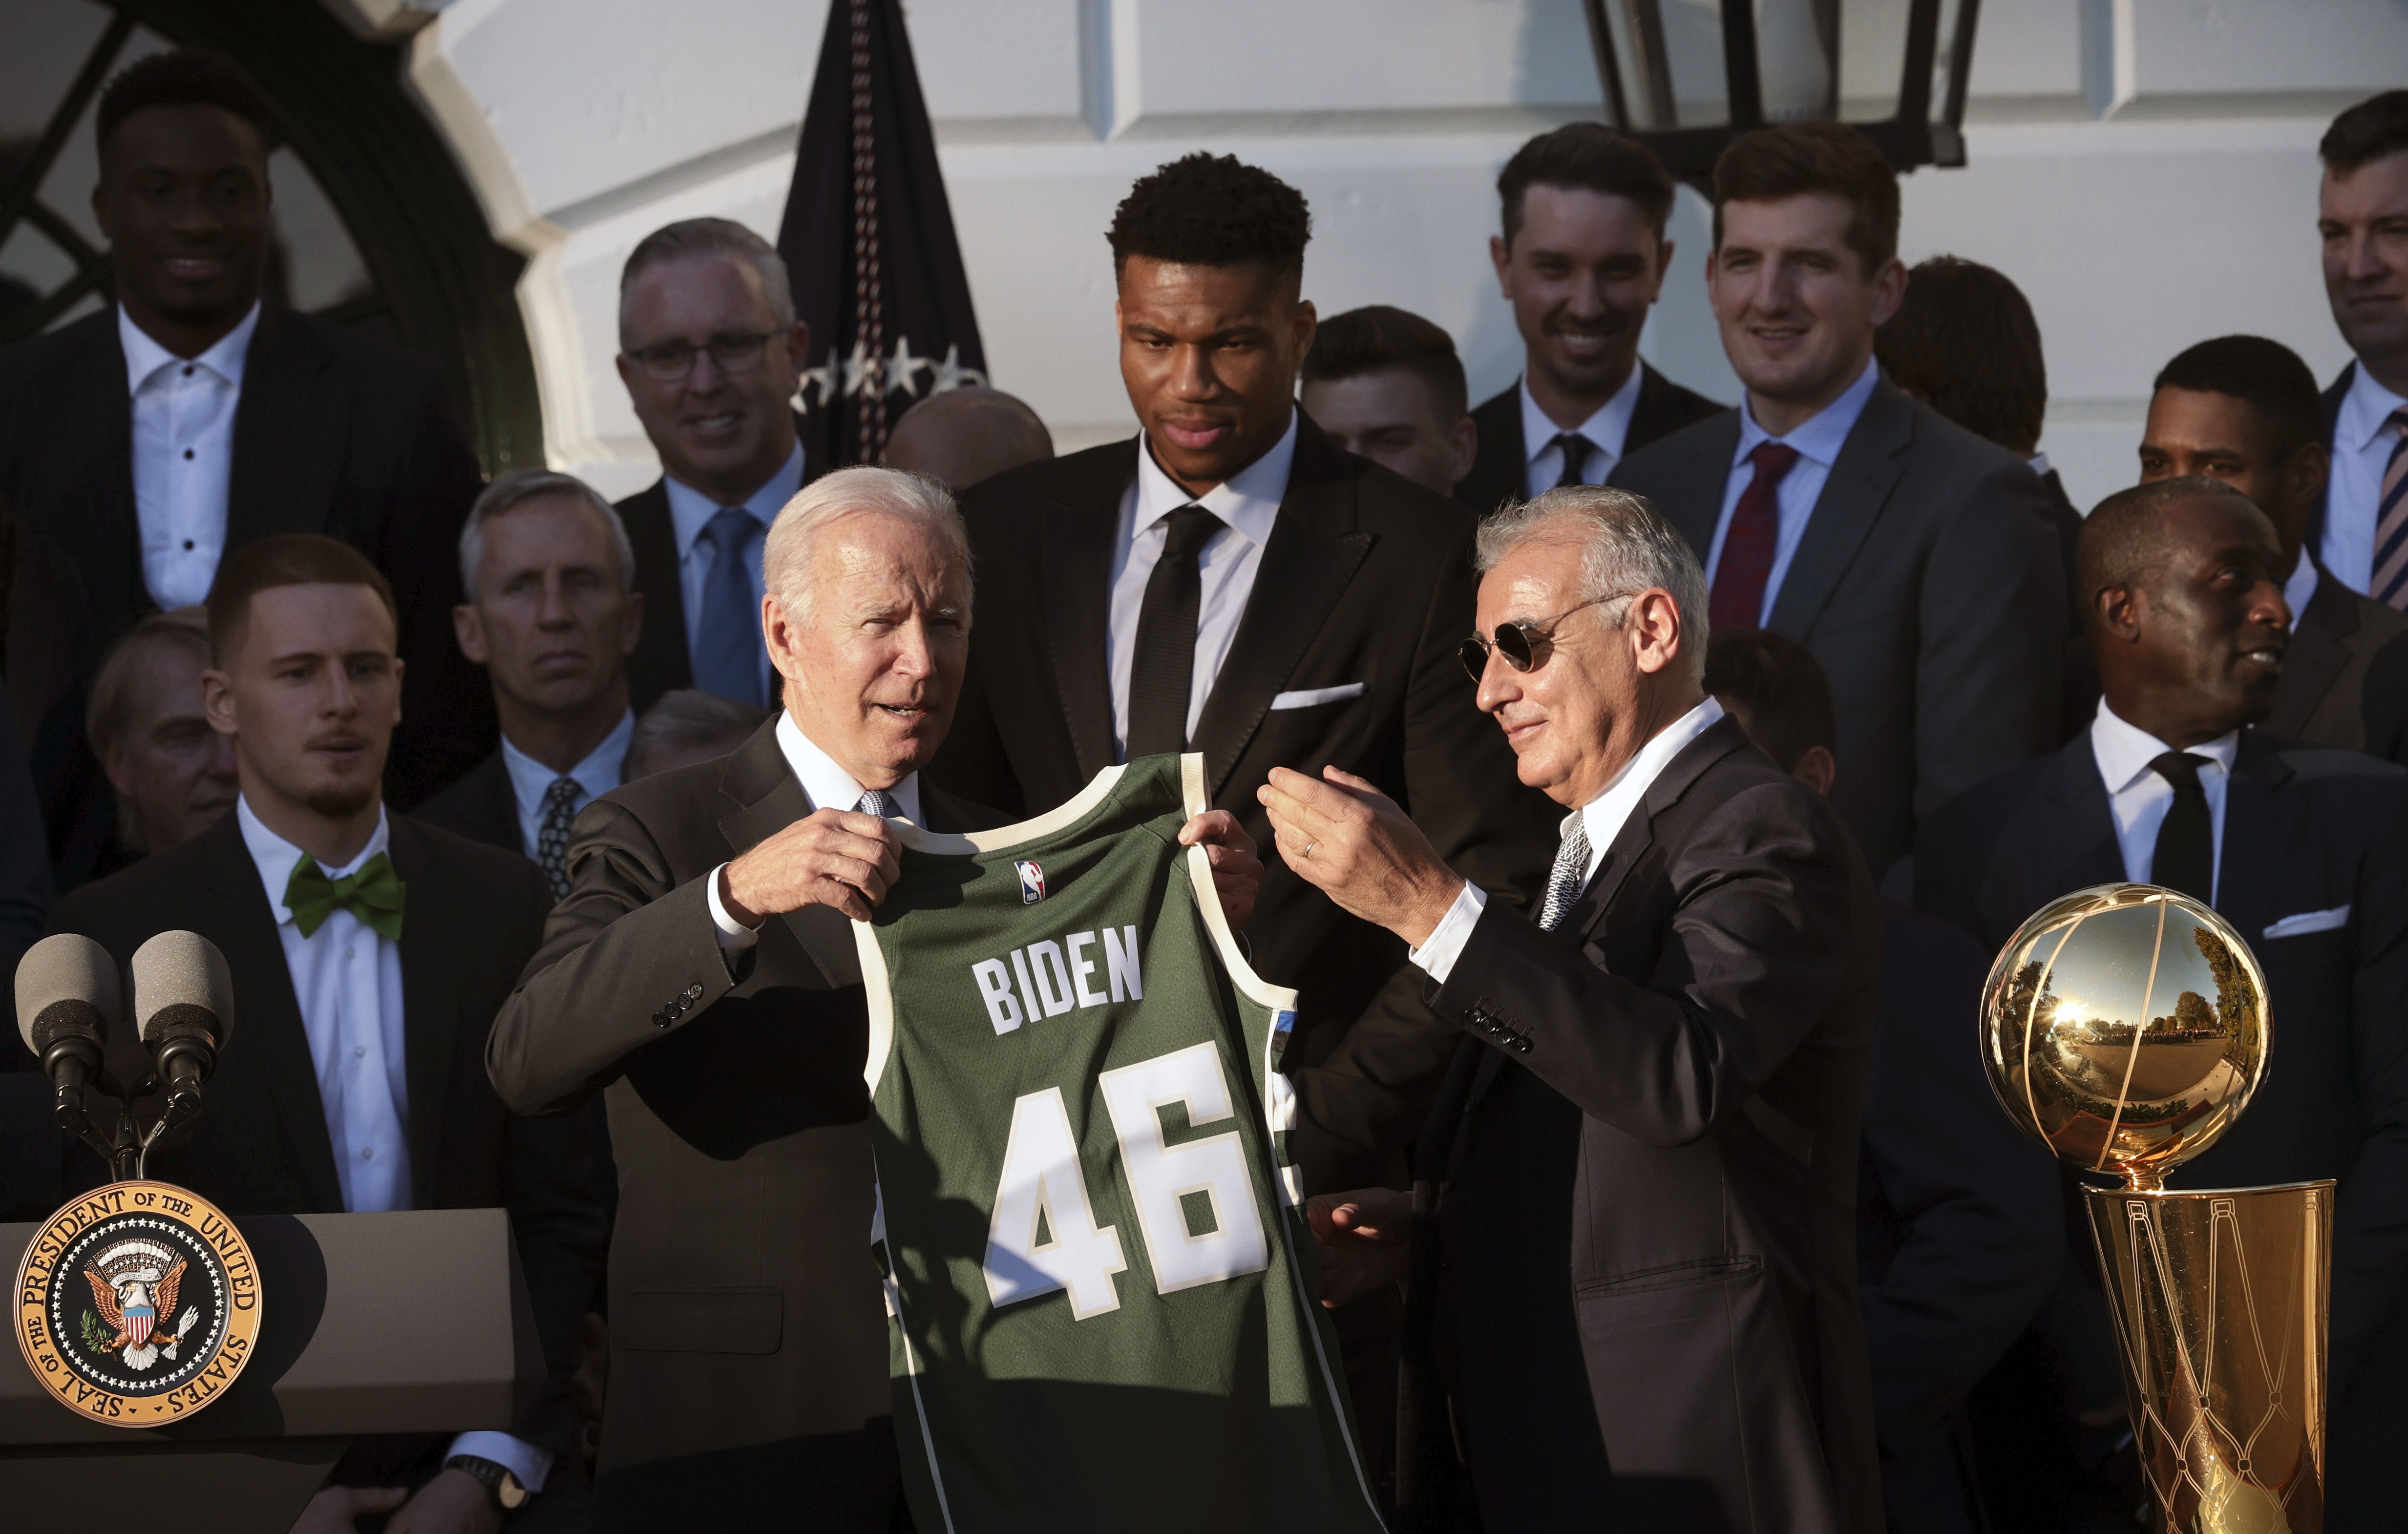 President Biden being presented with a commemorative Bucks Jersey